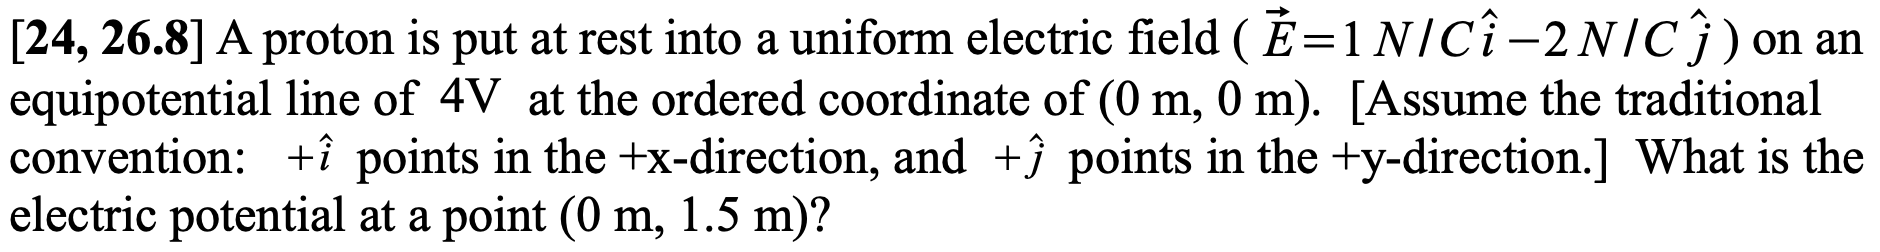 [24, 26.8] A proton is put at rest into a uniform electric field ( É=1 N/Cî-2NIC}) on an
equipotential line of 4V at the ordered coordinate of (0 m, 0 m). [Assume the traditional
convention: +î points in the +x-direction, and +ĵ points in the +y-direction.] What is the
electric potential at a point (0 m, 1.5 m)?
%3|
